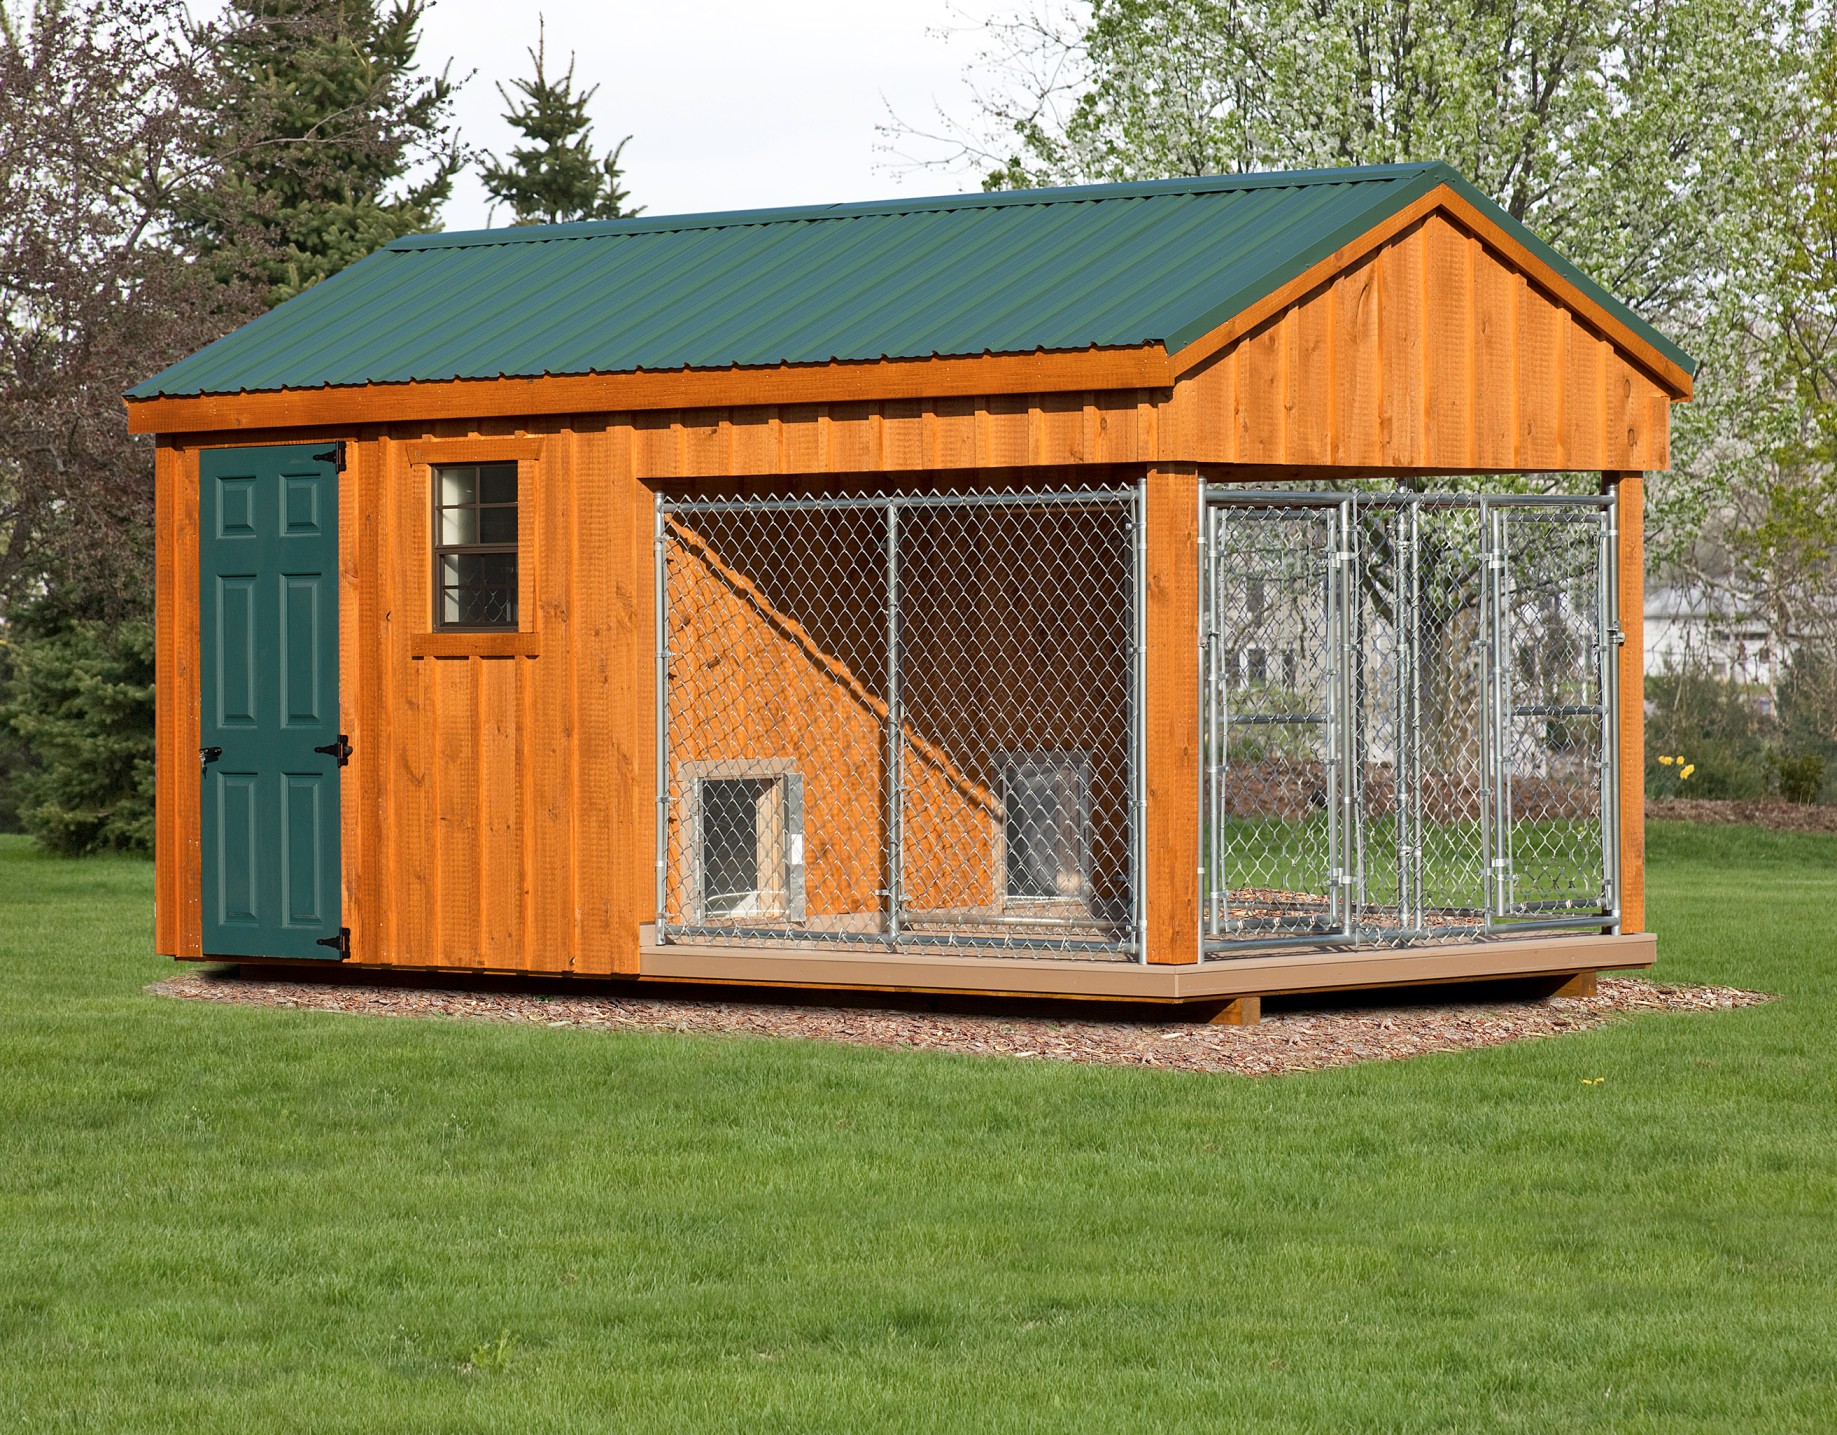 Front and side view of an 8x16 Standard double capacity kennel